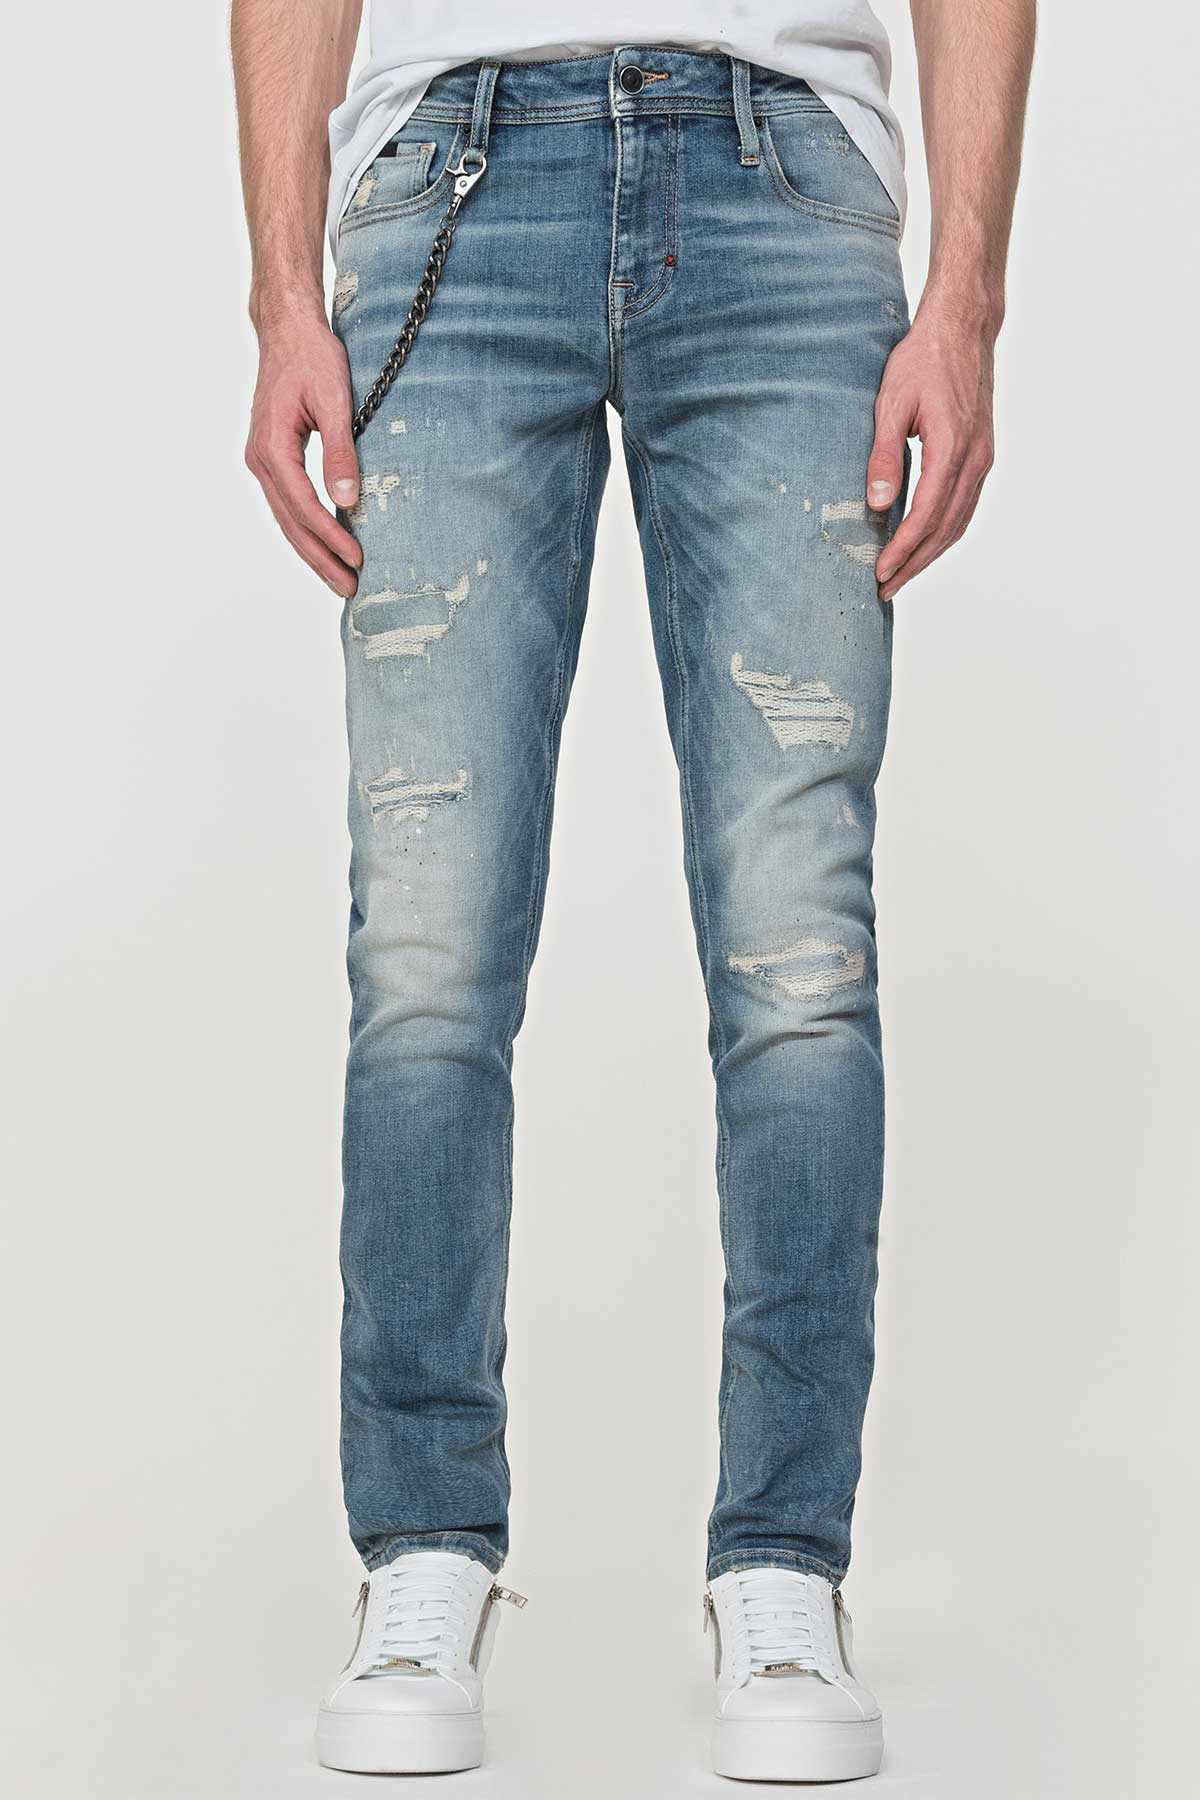 Antony Morato Iggy Tapered Fit Jeans-Libas Trendy Fashion Store